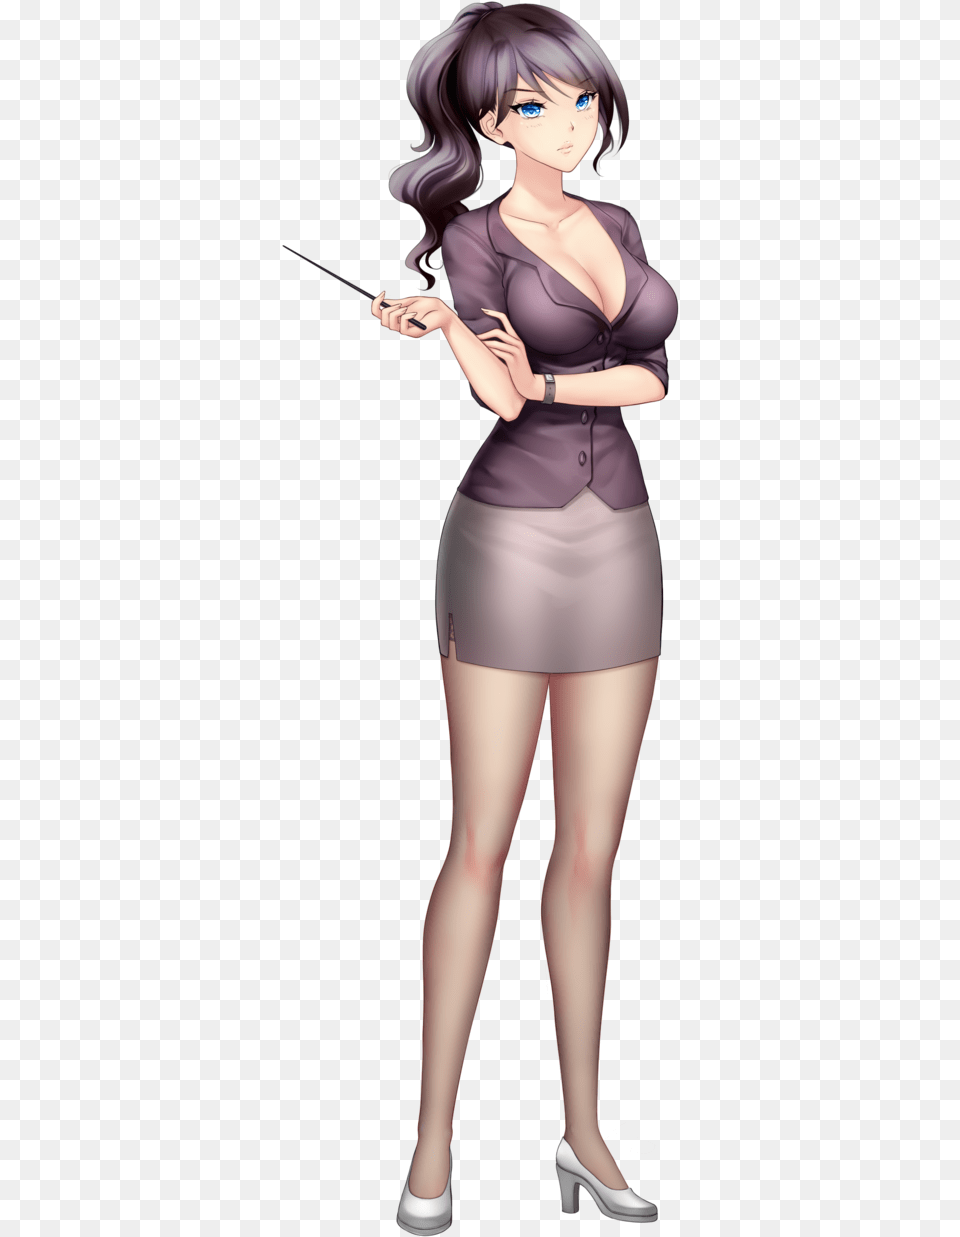 Anime Girl With Black Hair And Blue Eyes Anime Girl With Black Hair And Blue Eyes Work Outfit, Adult, Publication, Person, Female Png Image